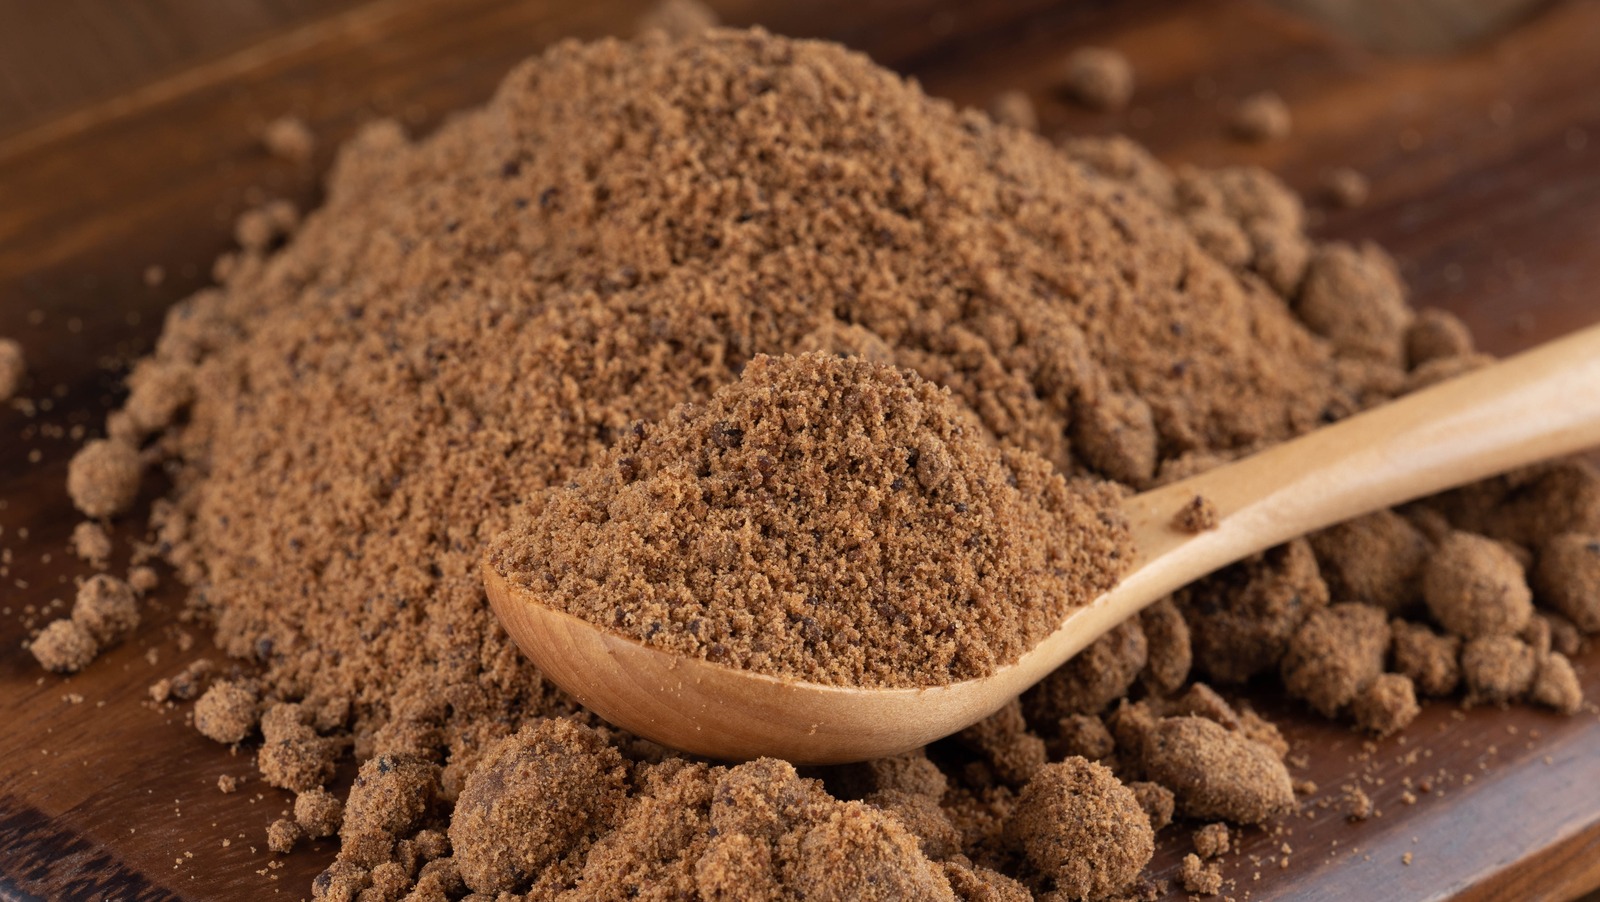 Brown Sugar Vs Muscovado Sugar: What's The Difference?